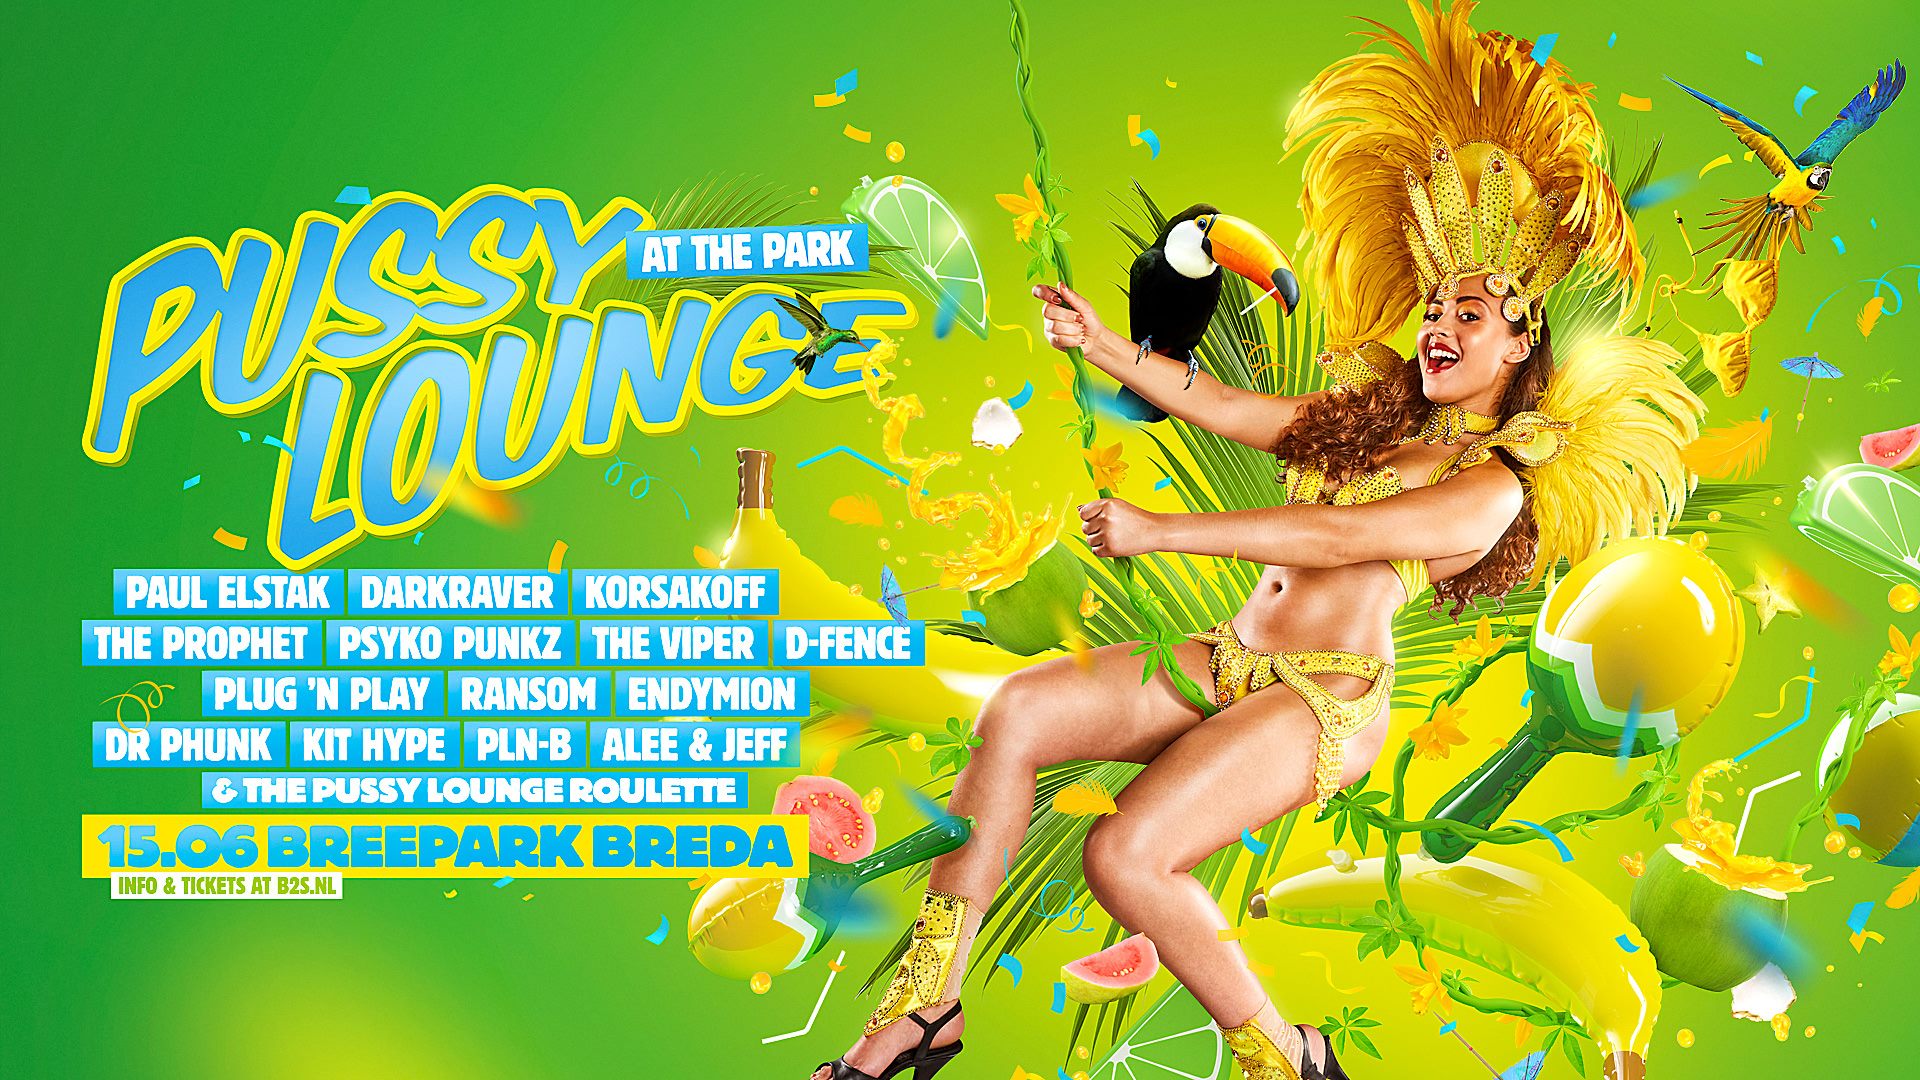 Pussylounge at the park 2019